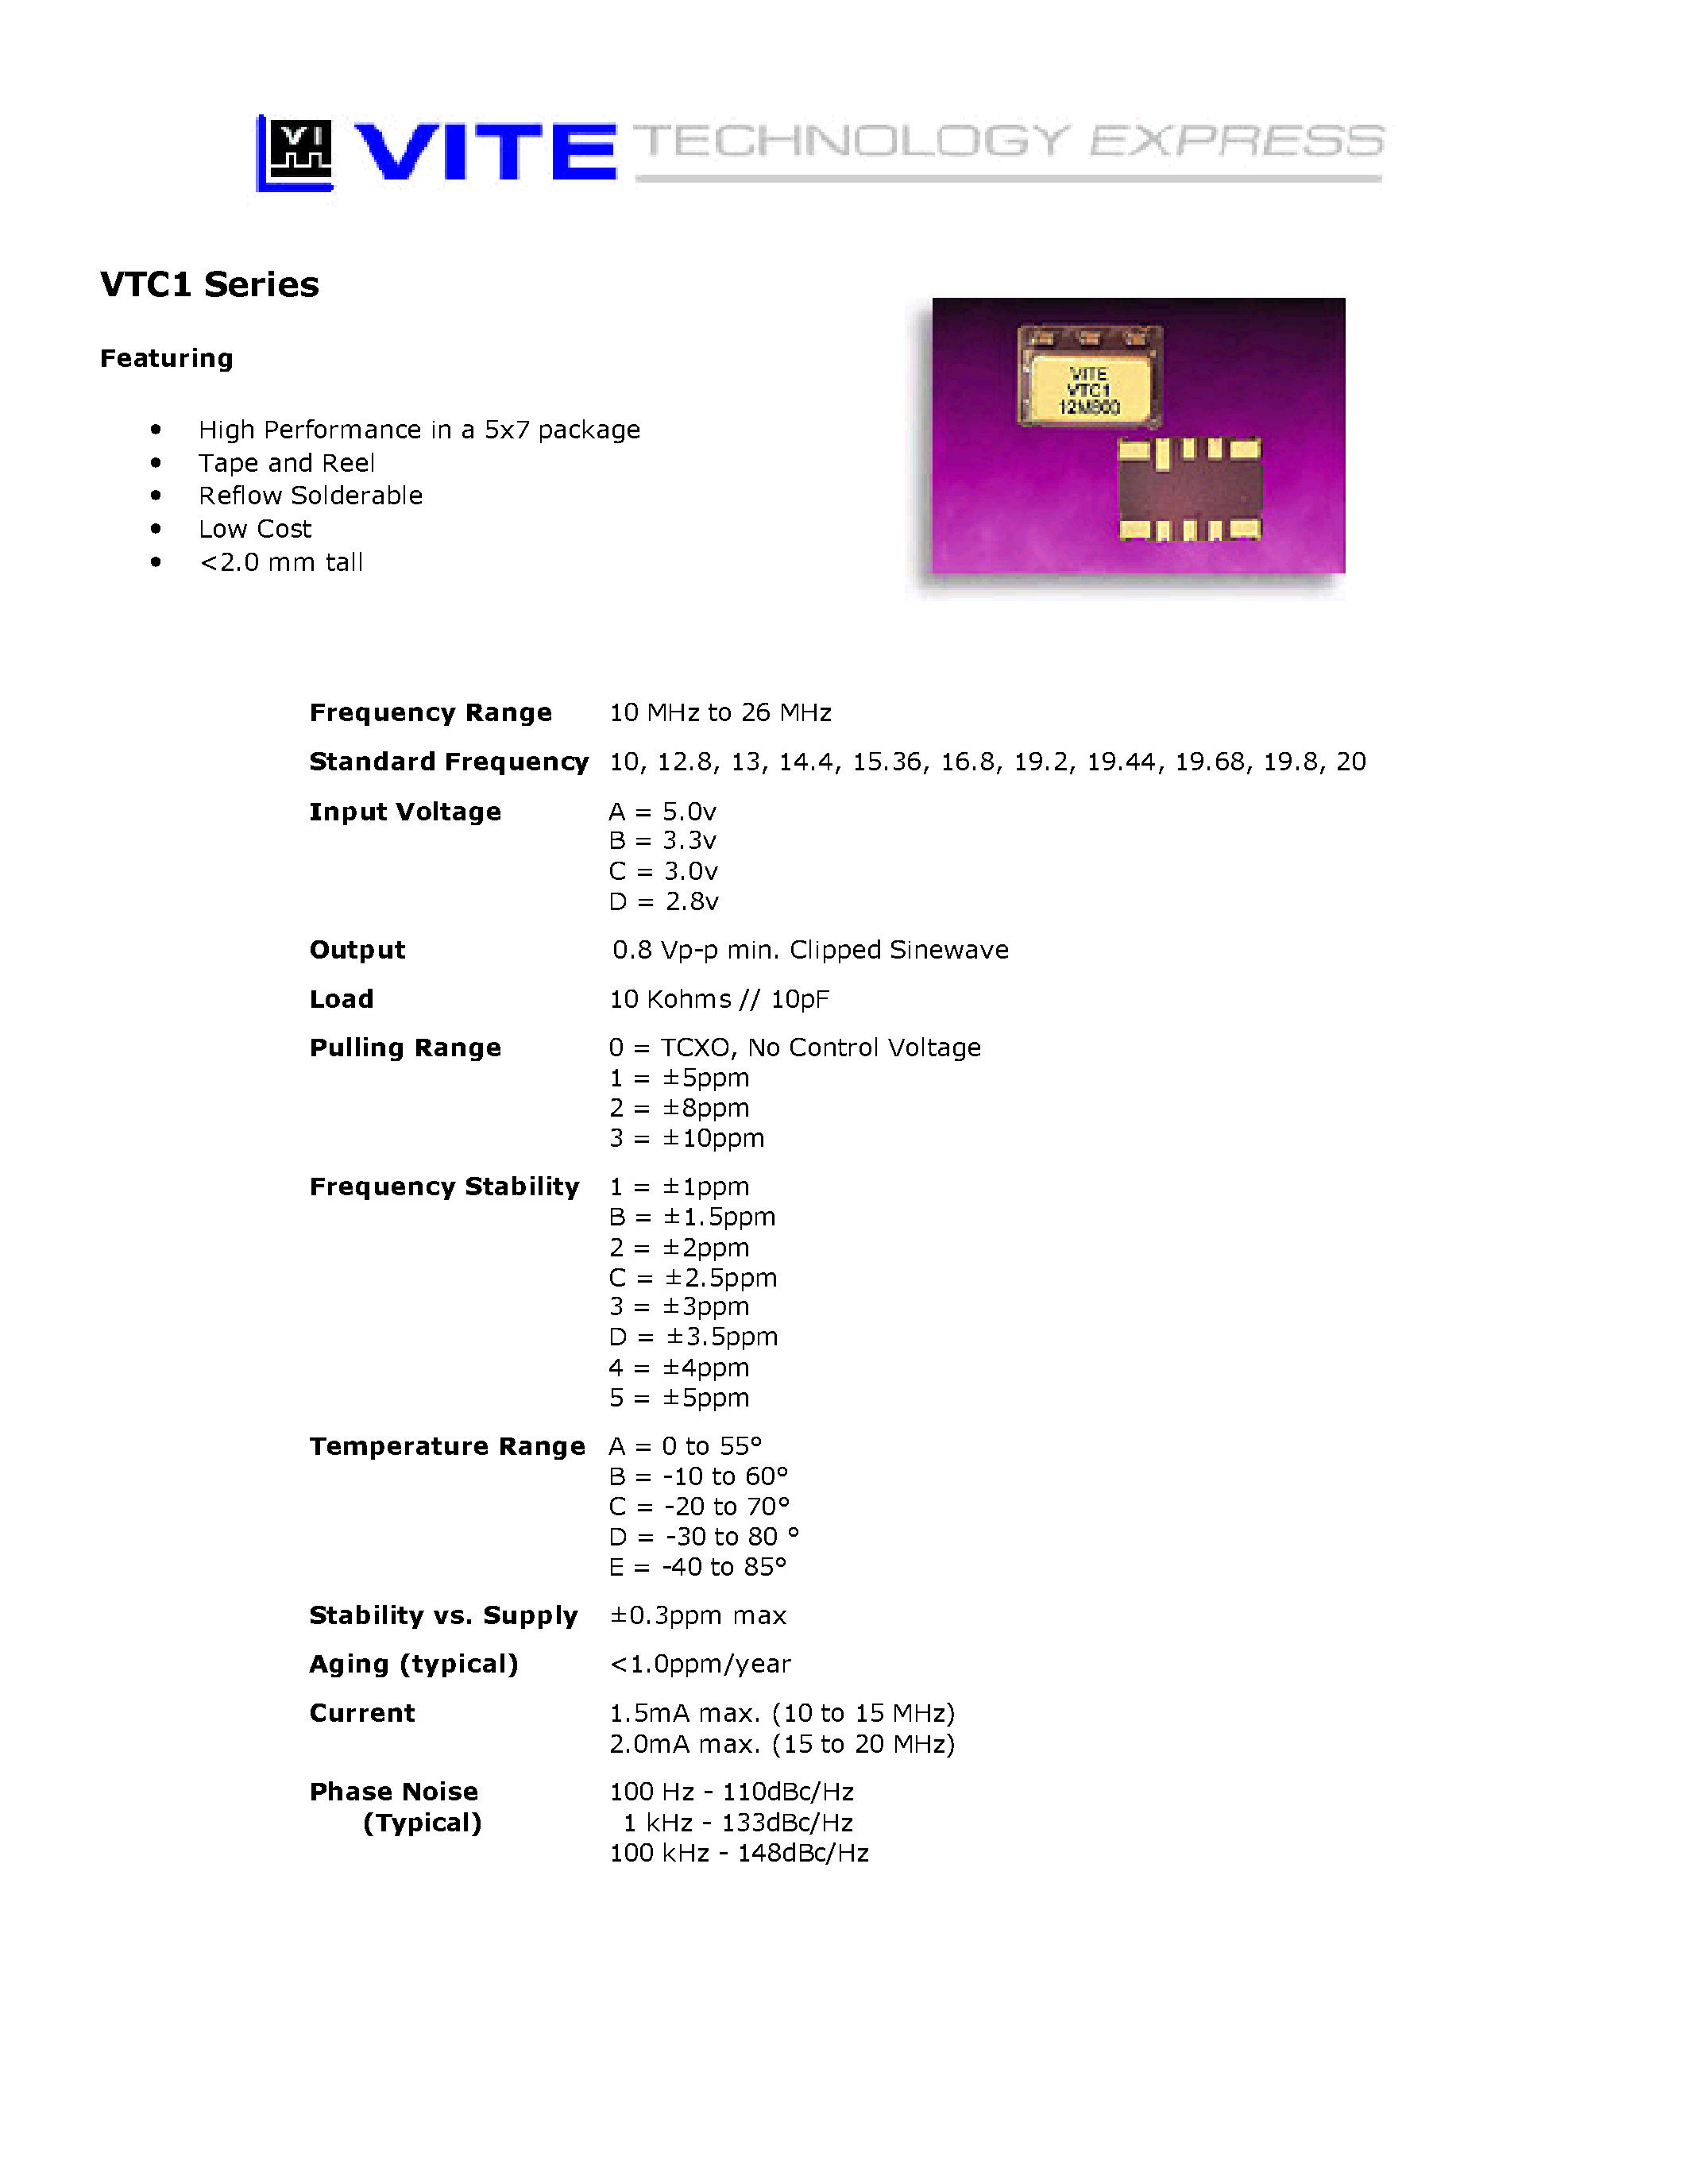 Даташит VTC1 - High Performance in a 5x7 package страница 1